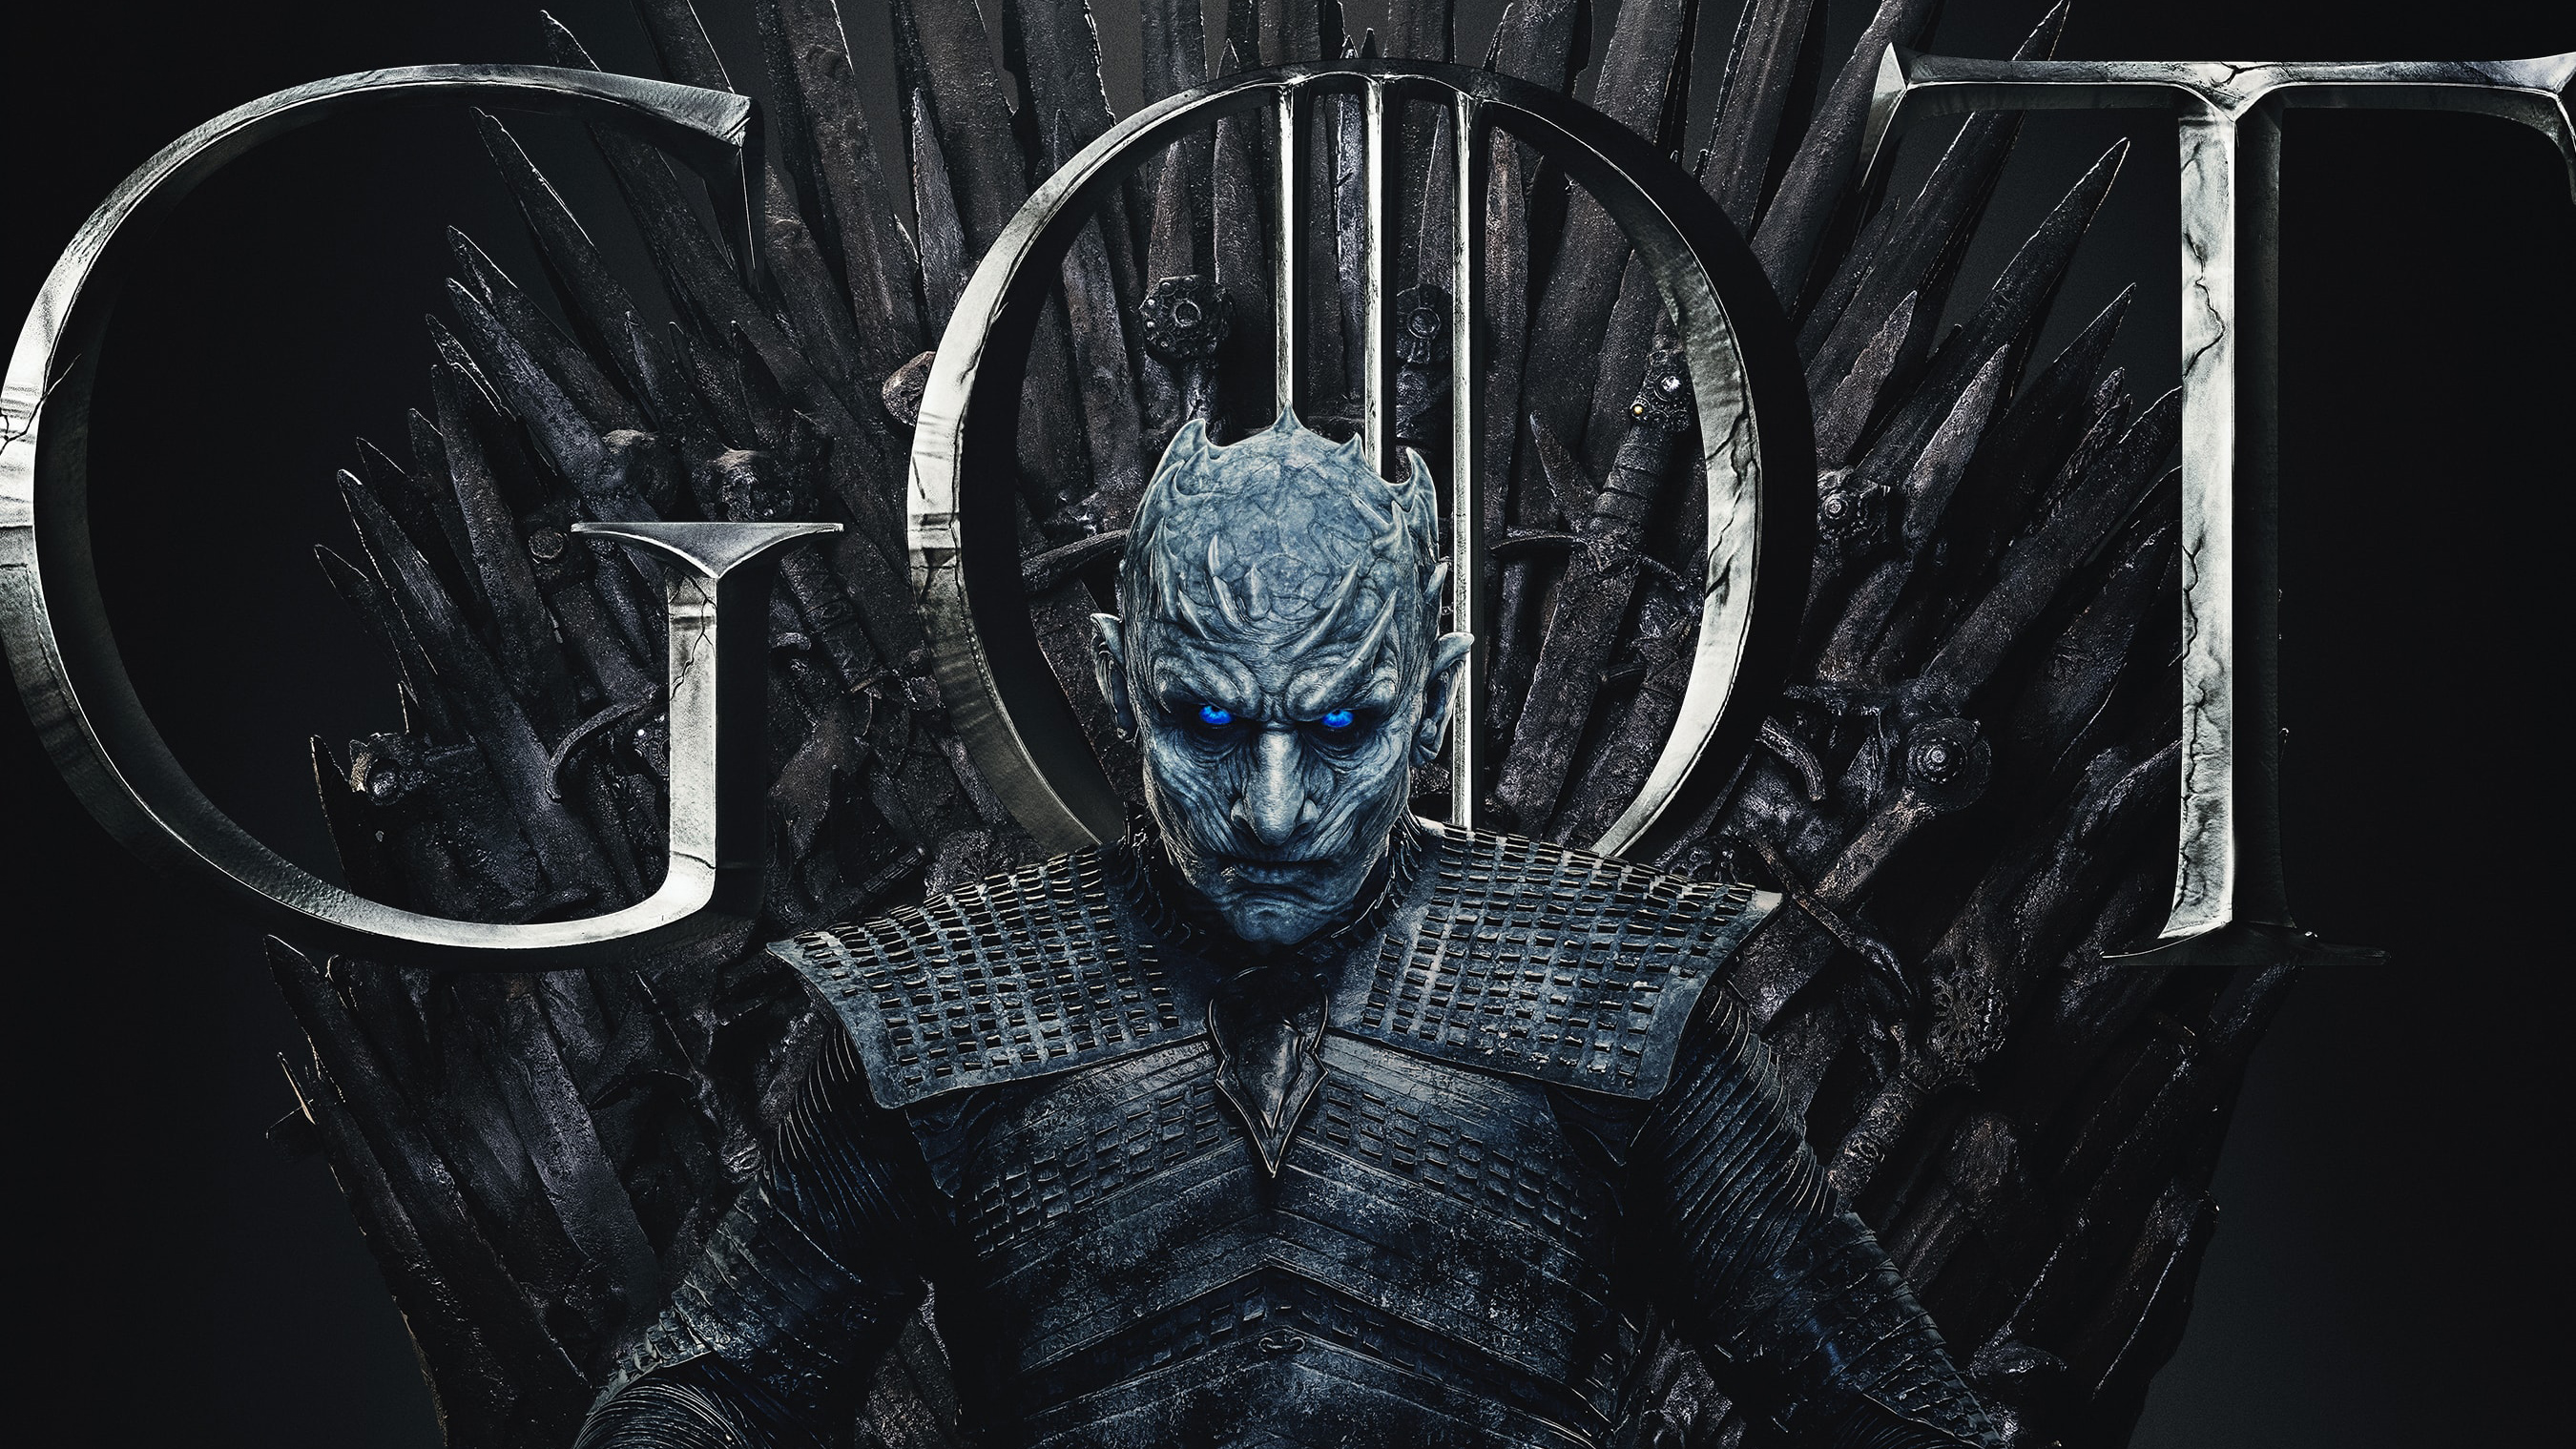 Night King Game Of Thrones Season 8 Poster, HD Tv Shows, 4k Wallpaper, Image, Background, Photo and Picture